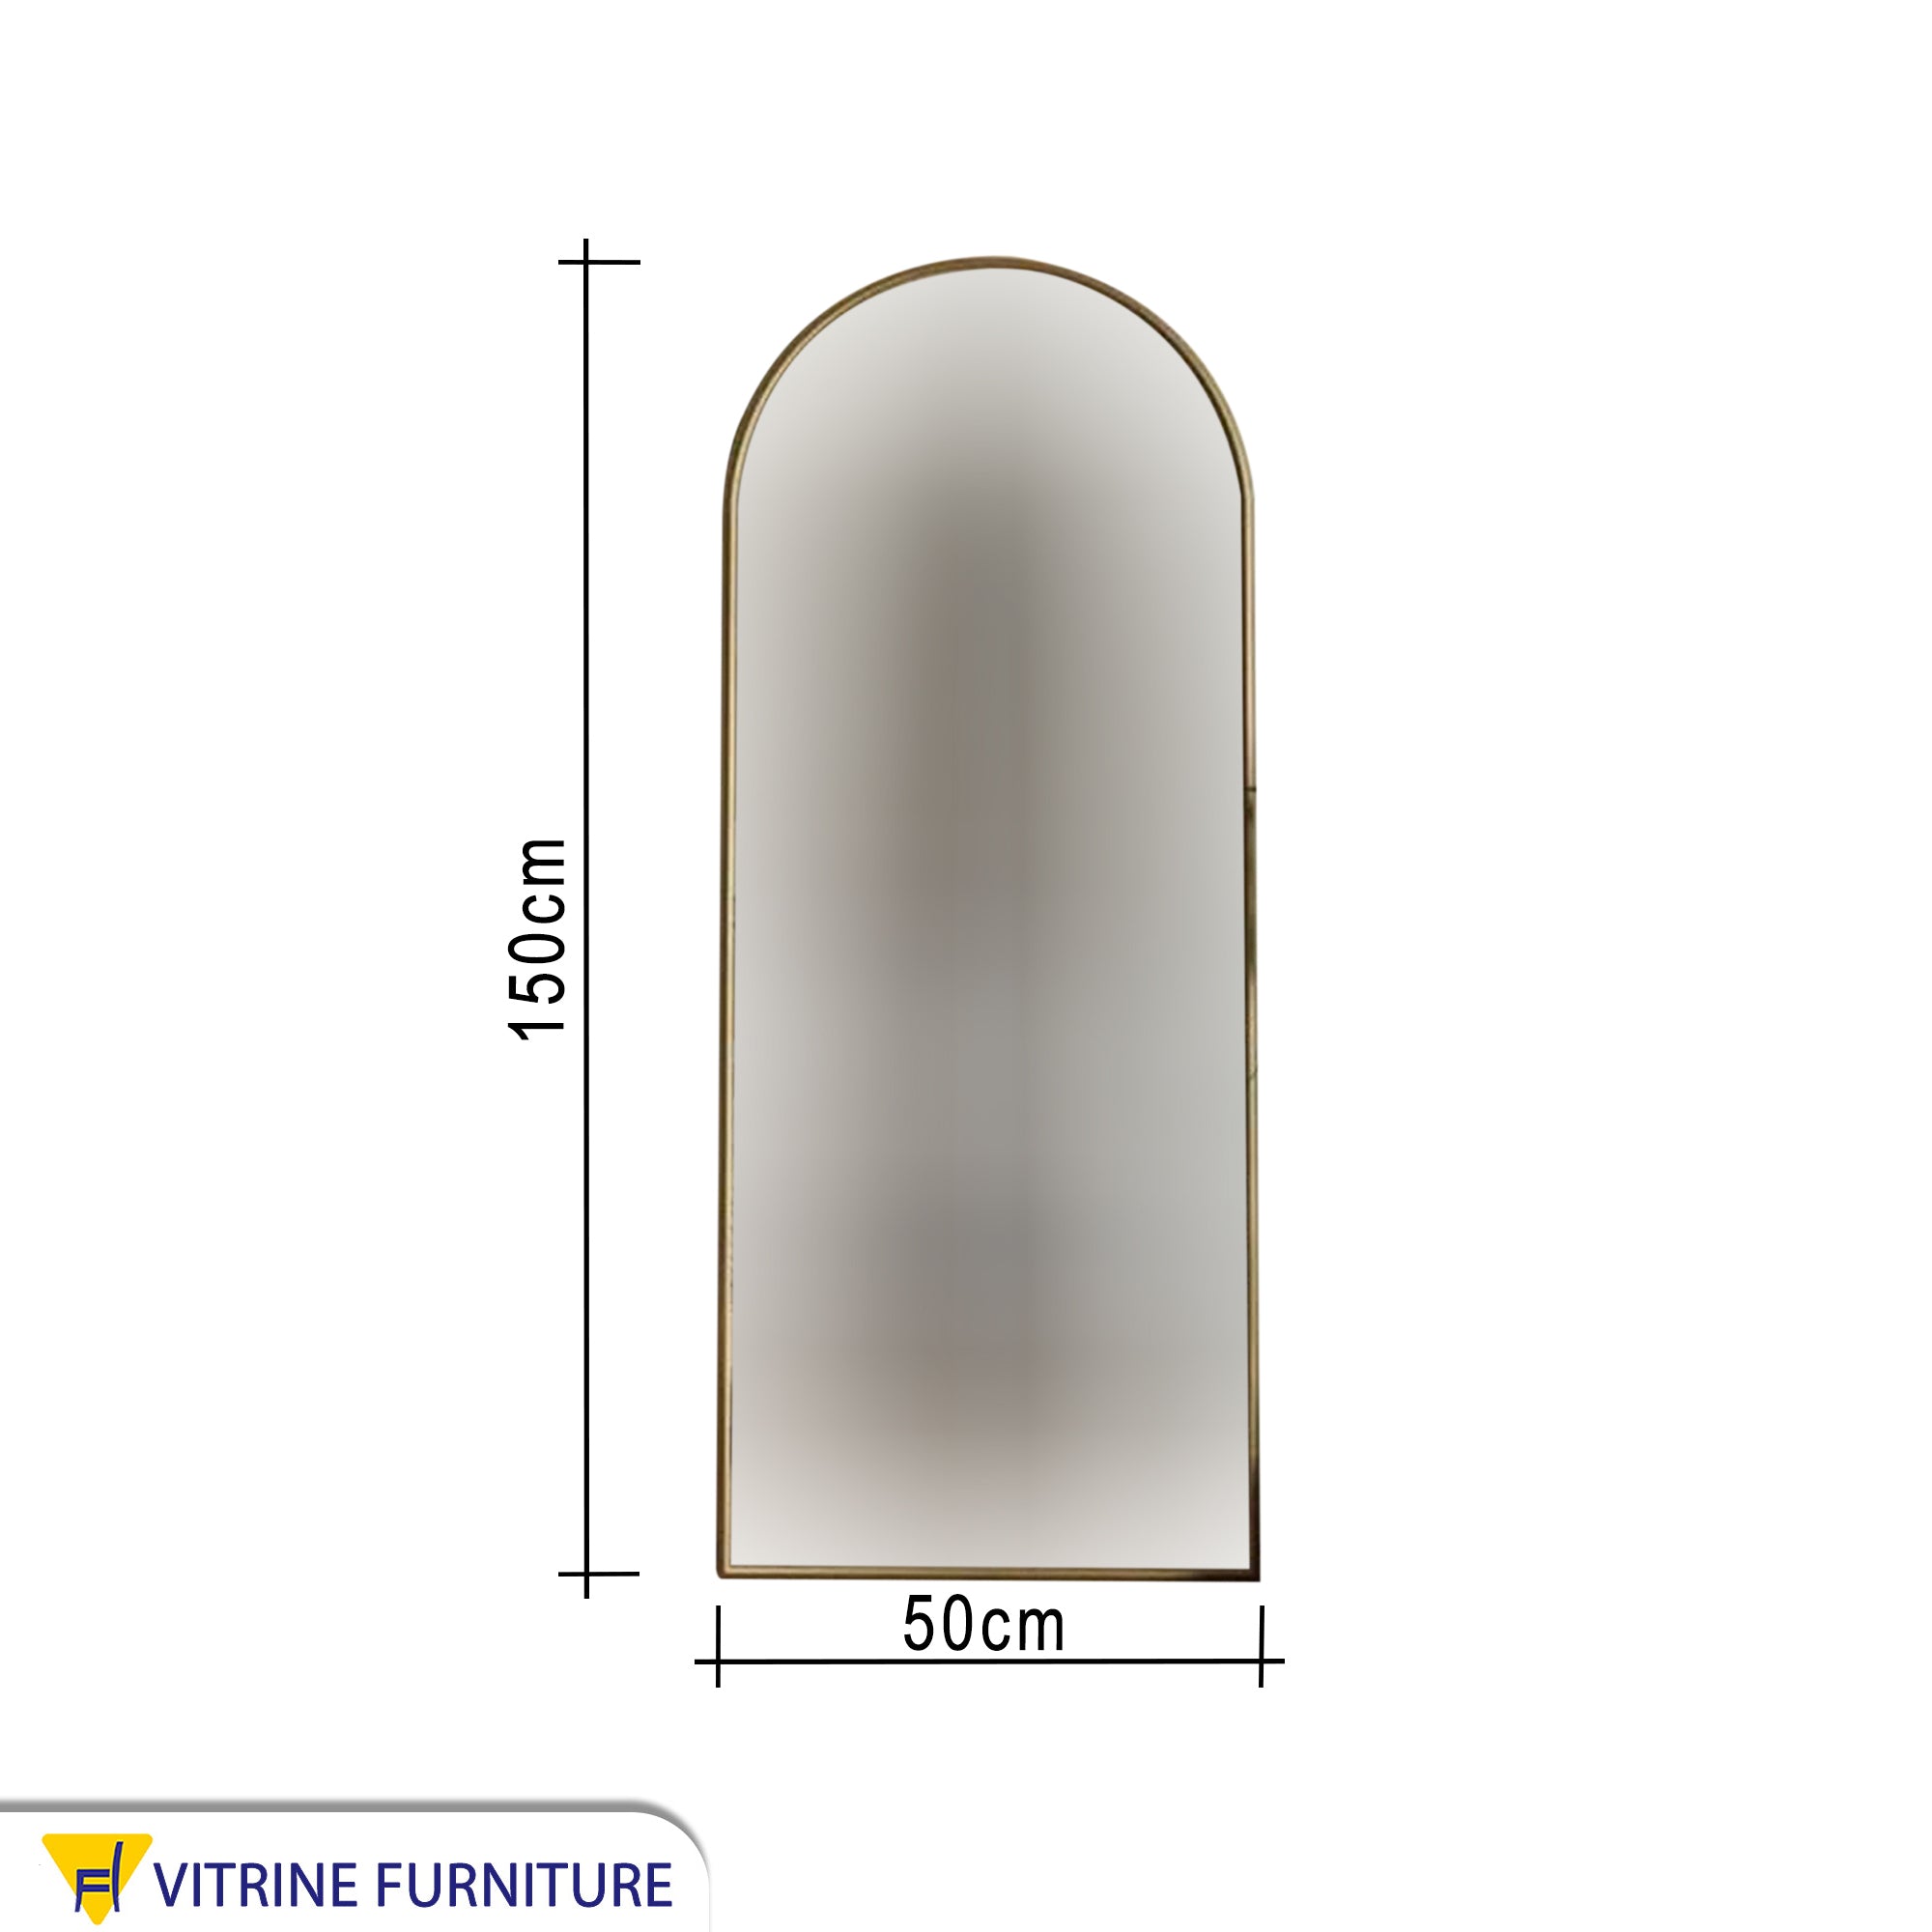 Stand mirror 50*150 with a thin golden frame